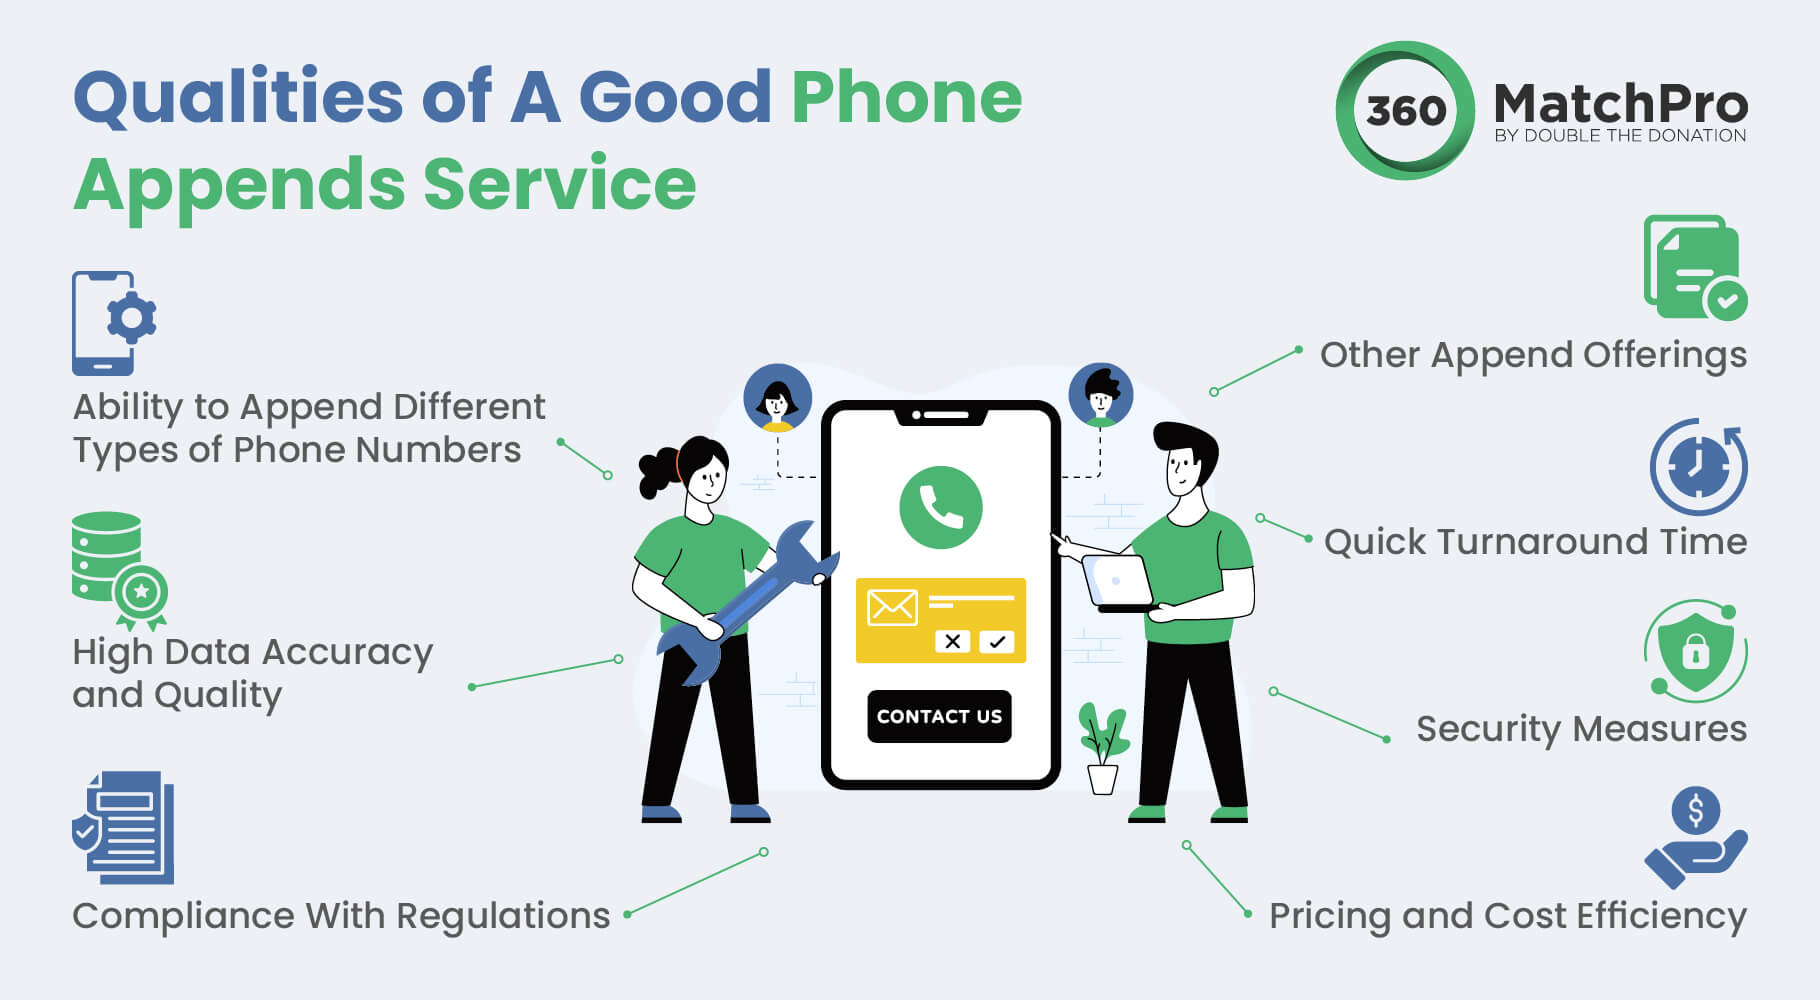 The qualities of a good phone appending services provider, explained in the text below